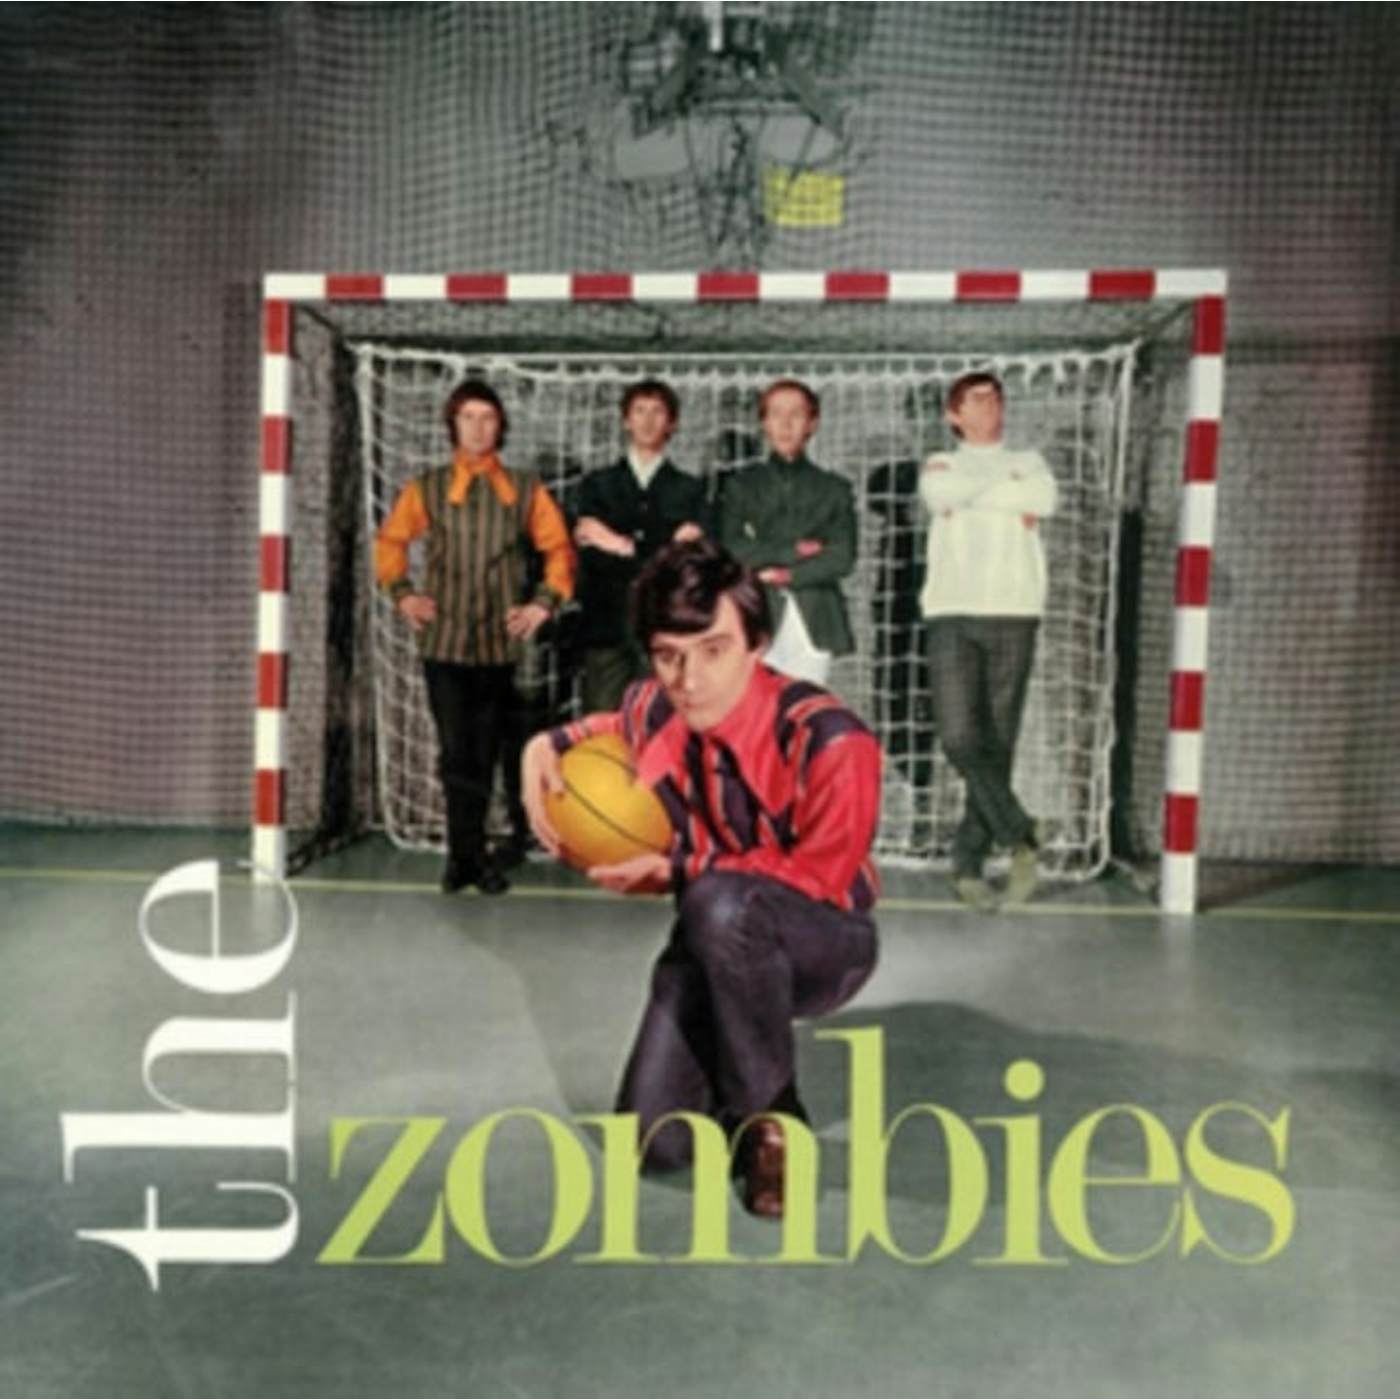 The Zombies LP Vinyl Record - The Zombies (Clear Vinyl)